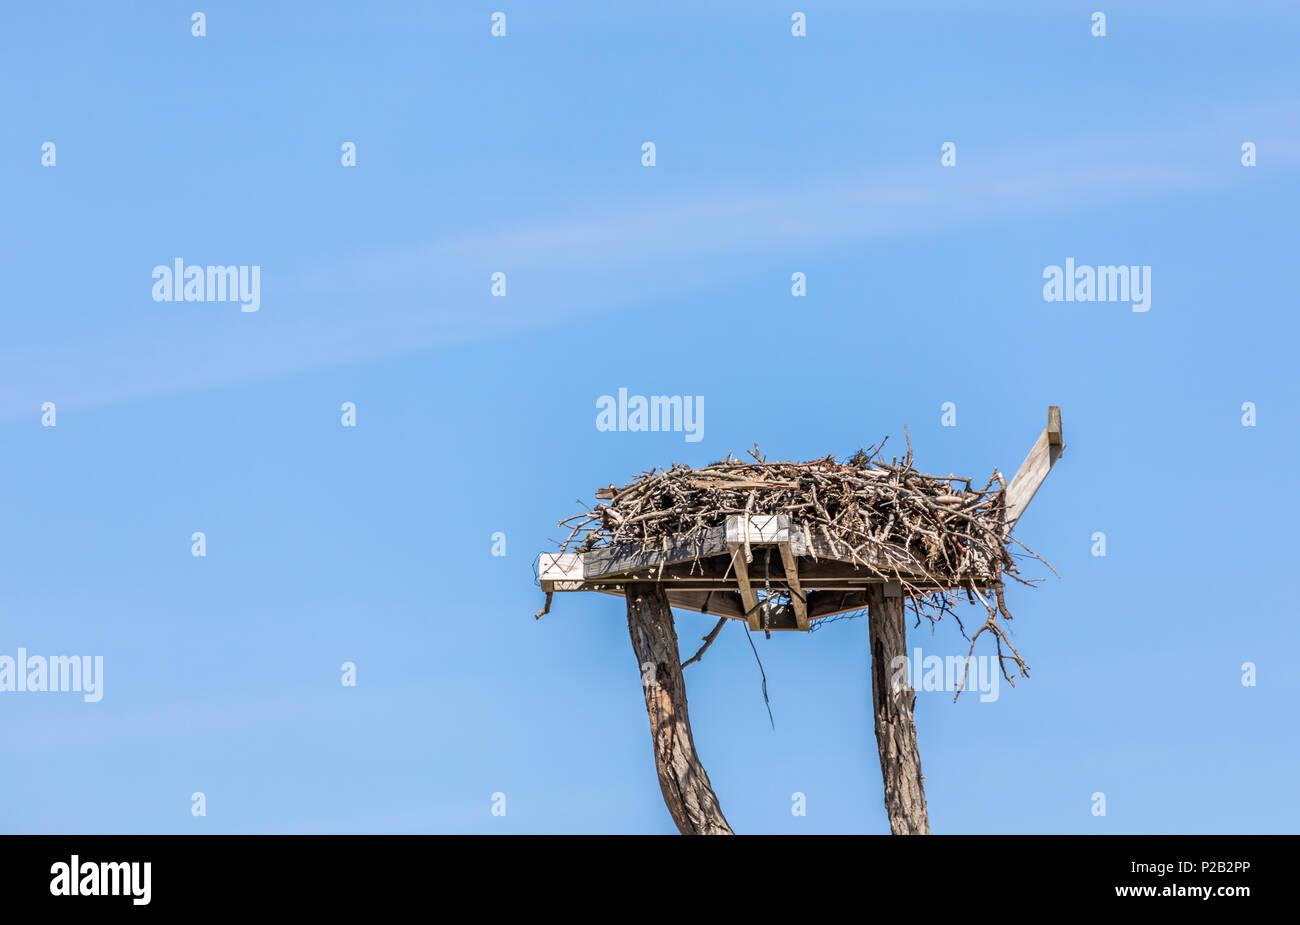 detail image of an Osprey nest against a brilliant blue sky in Sag Harbor, NY Stock Photo